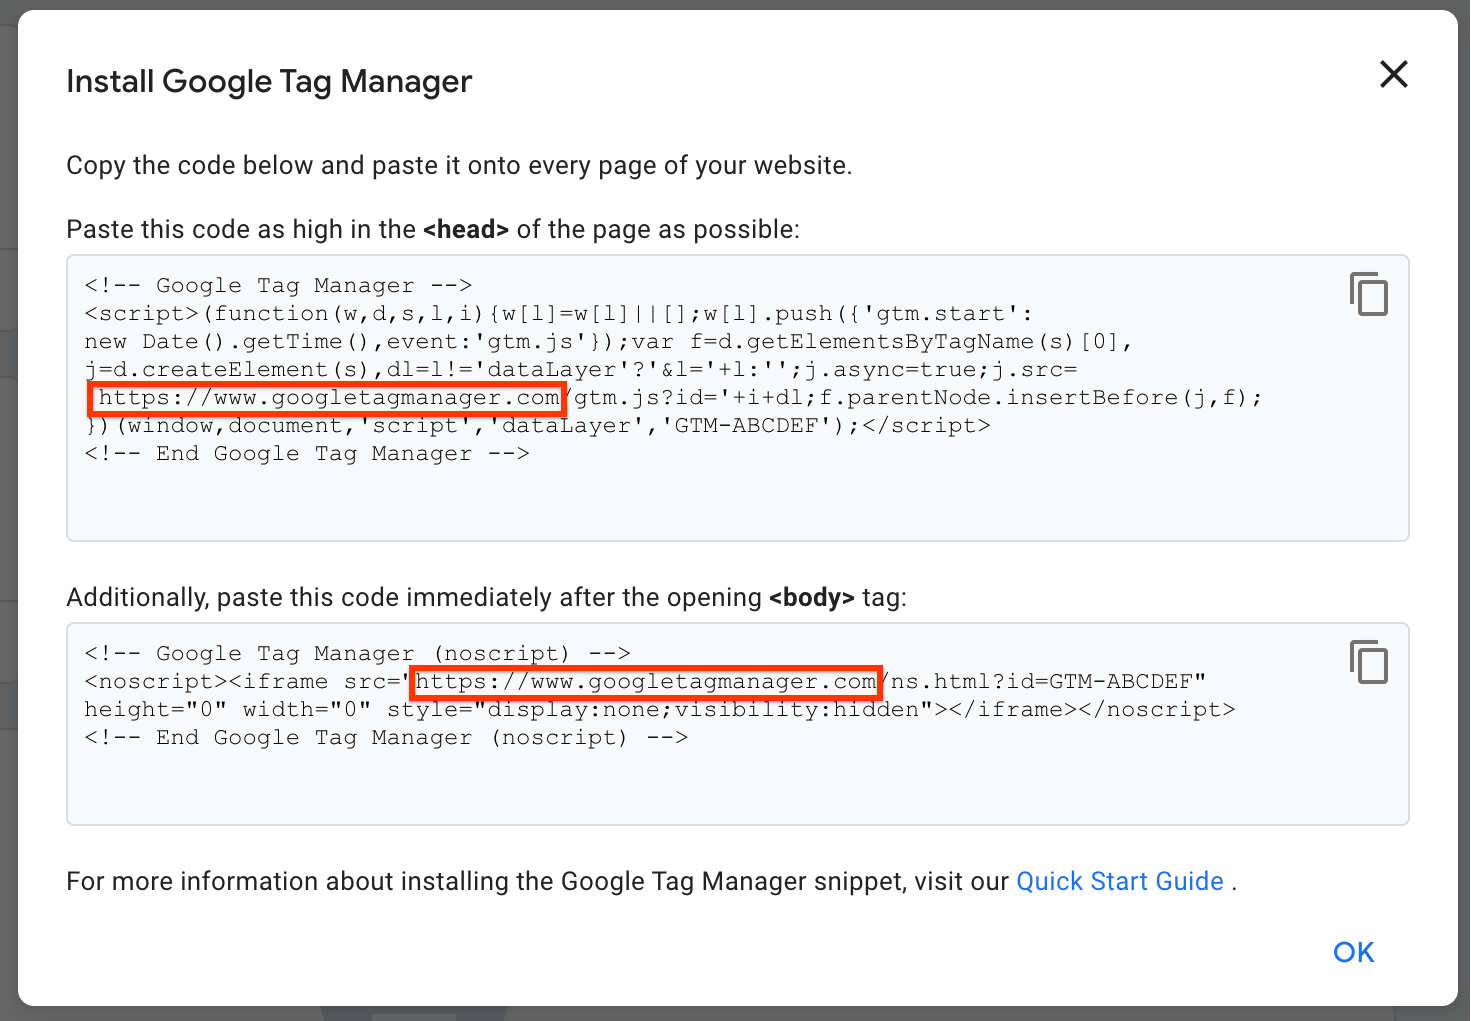 Screenshot of the Google Tag Manager snippet for gtm.js and ns.html insertion